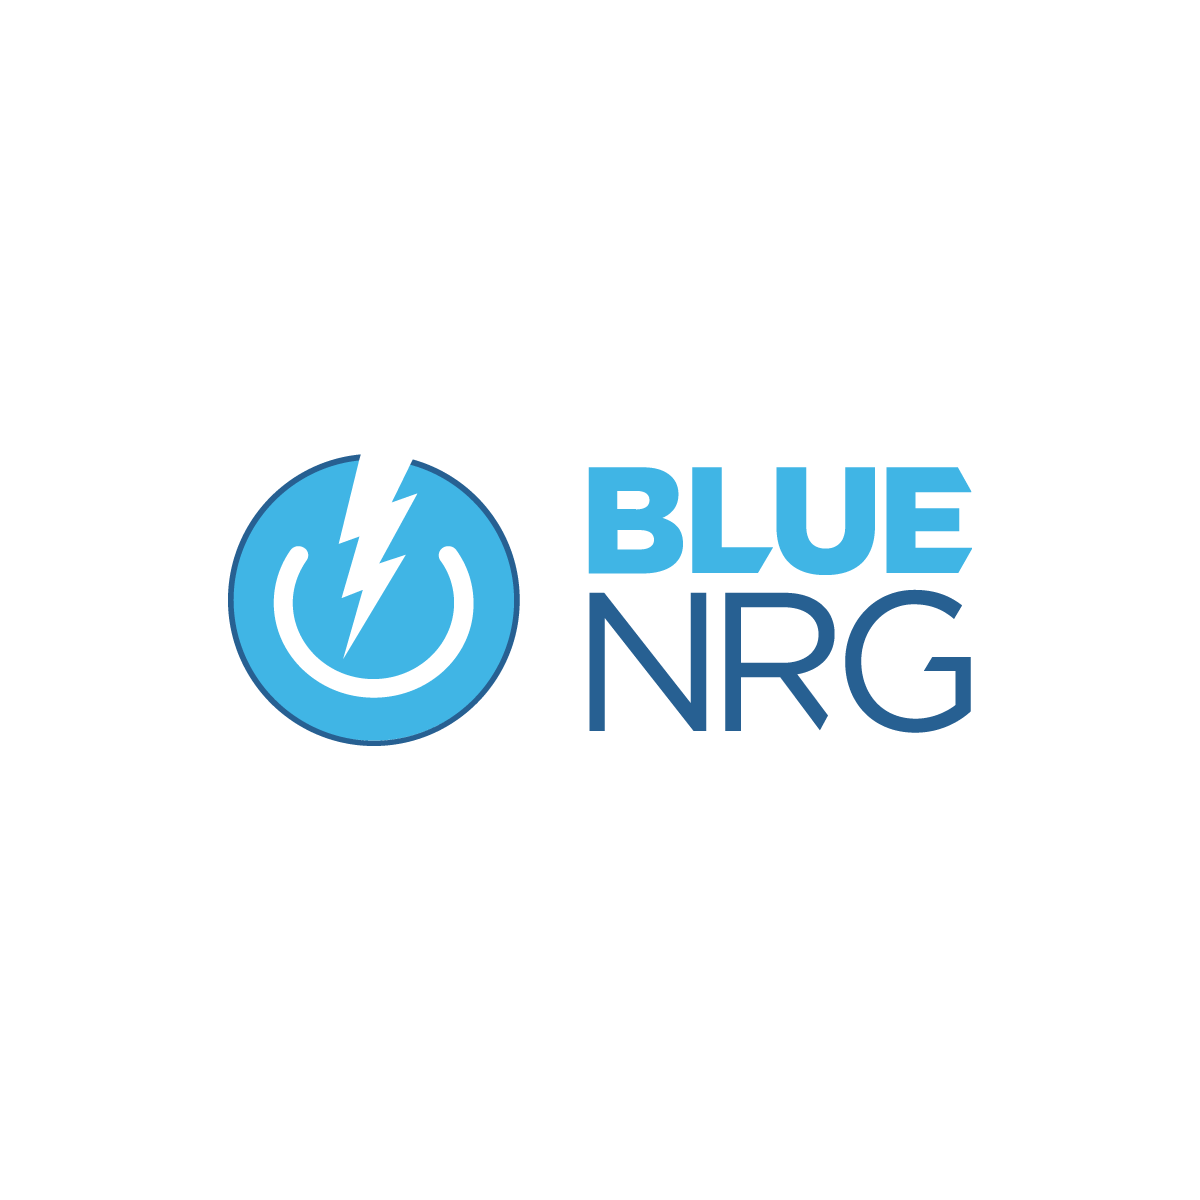 NRG Logo - Business Electricity Provider in VIC, NSW and SA | Blue NRG